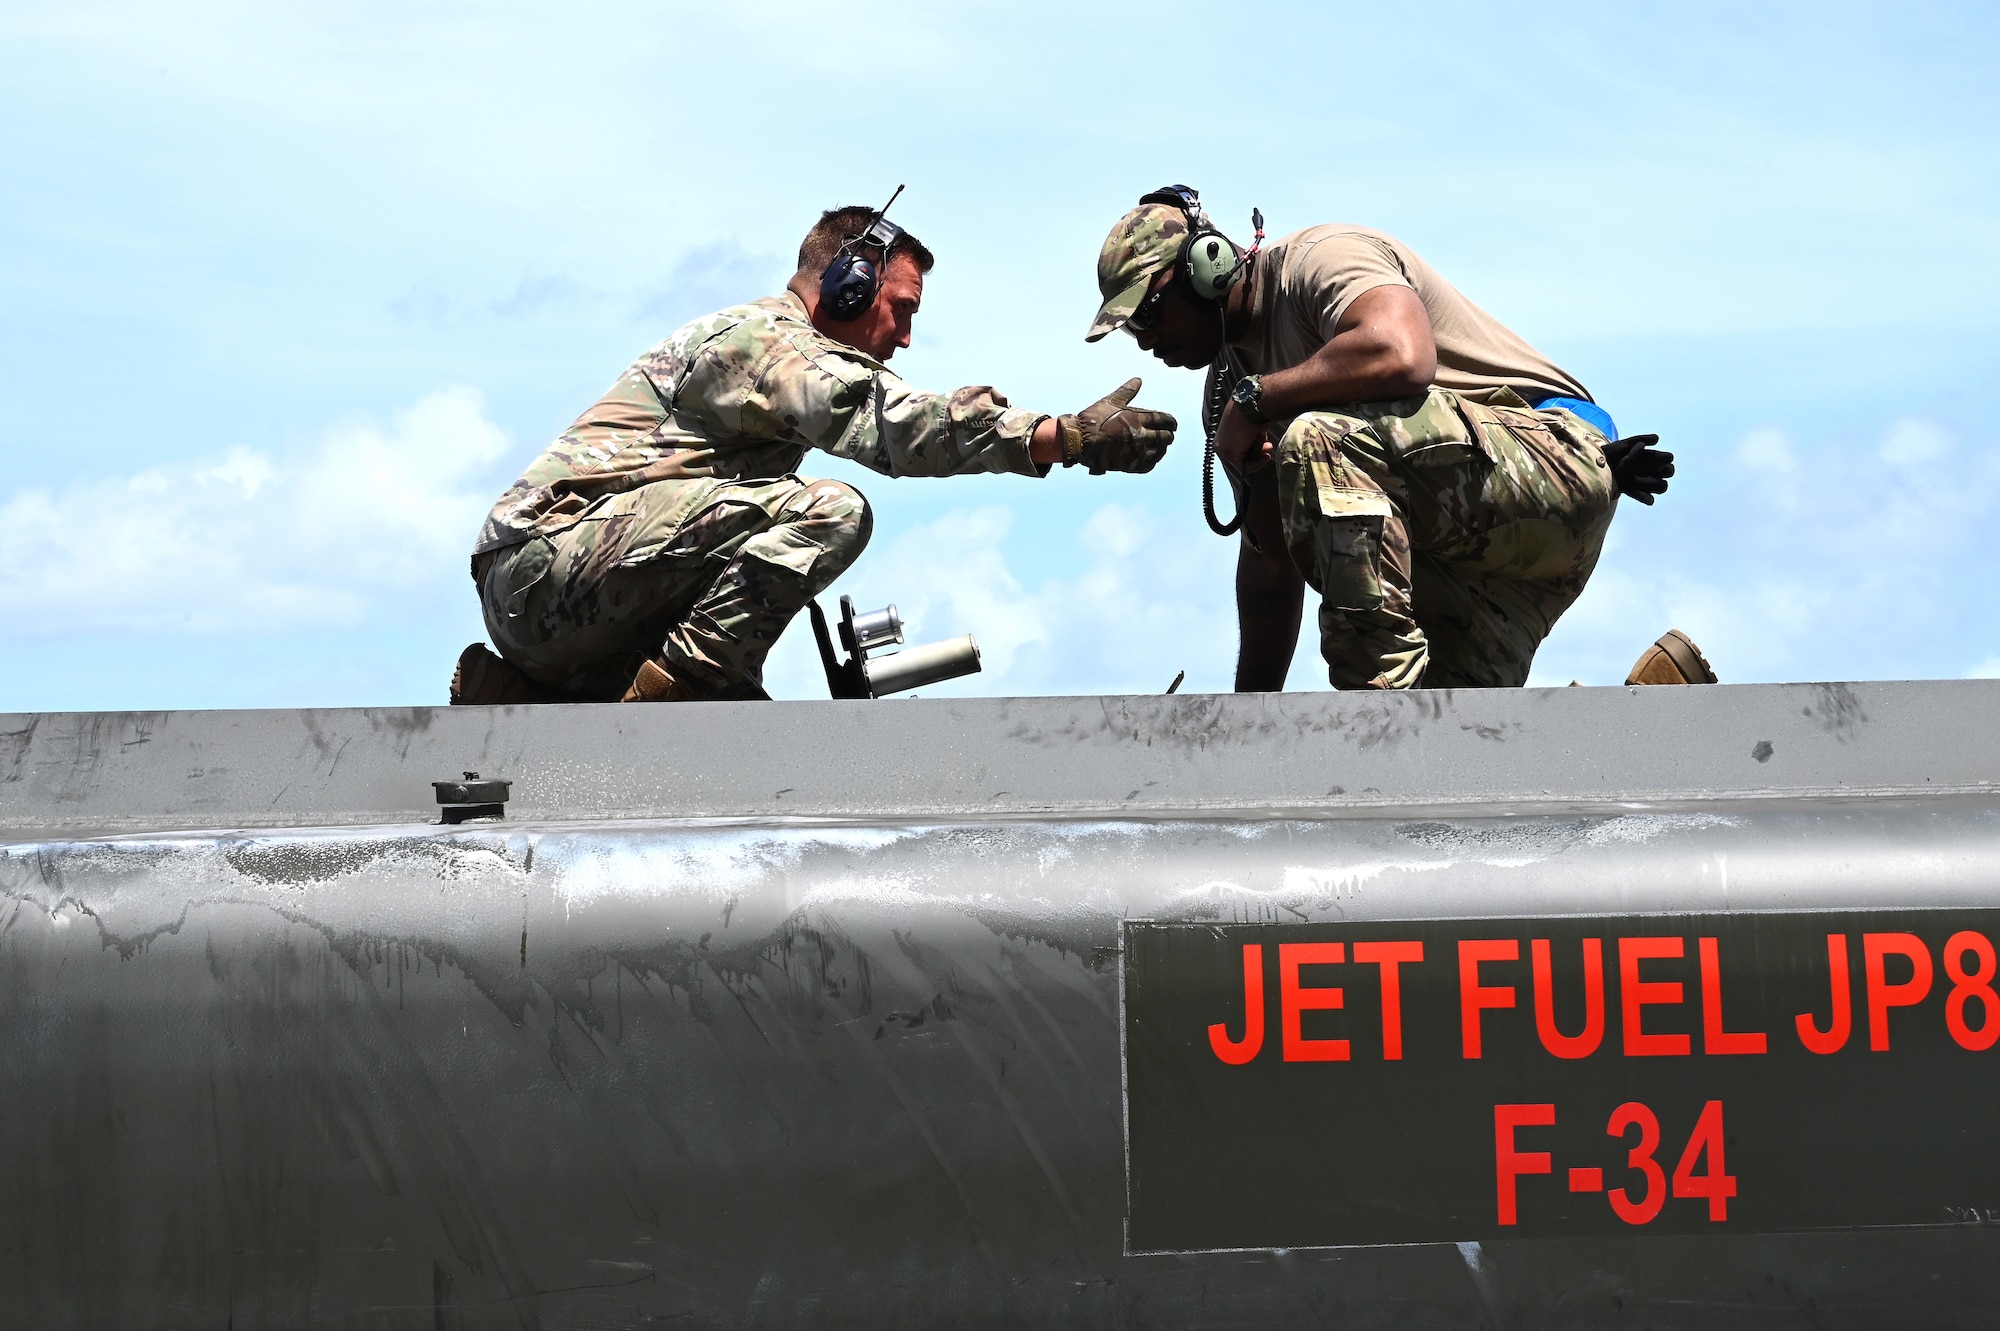 Tech. Sgt. Jordan Laughlin, left, the fuels distribution section chief assigned to the 3rd Air Expeditionary Wing, explains fuel levels in an R-11 refueling truck to Tech. Sgt. Brandon Bryant, right, a flying crew chief with the 703rd Aircraft Maintenance Squadron, Joint Base Elmendorf-Richardson, Alaska, during Exercise Agile Reaper 23-1 at Tinian International Airport, Northern Mariana Islands, March 3, 2023. Offloading fuel from a C-17 into an R-11 refueling truck allows fuels distribution operators the ability to rapidly refuel other aircraft in an Agile Combat Employment scenario by bypassing the need for fuel bladders or storage containers. (U.S. Air Force photo by Tech. Sgt. Hailey Staker)